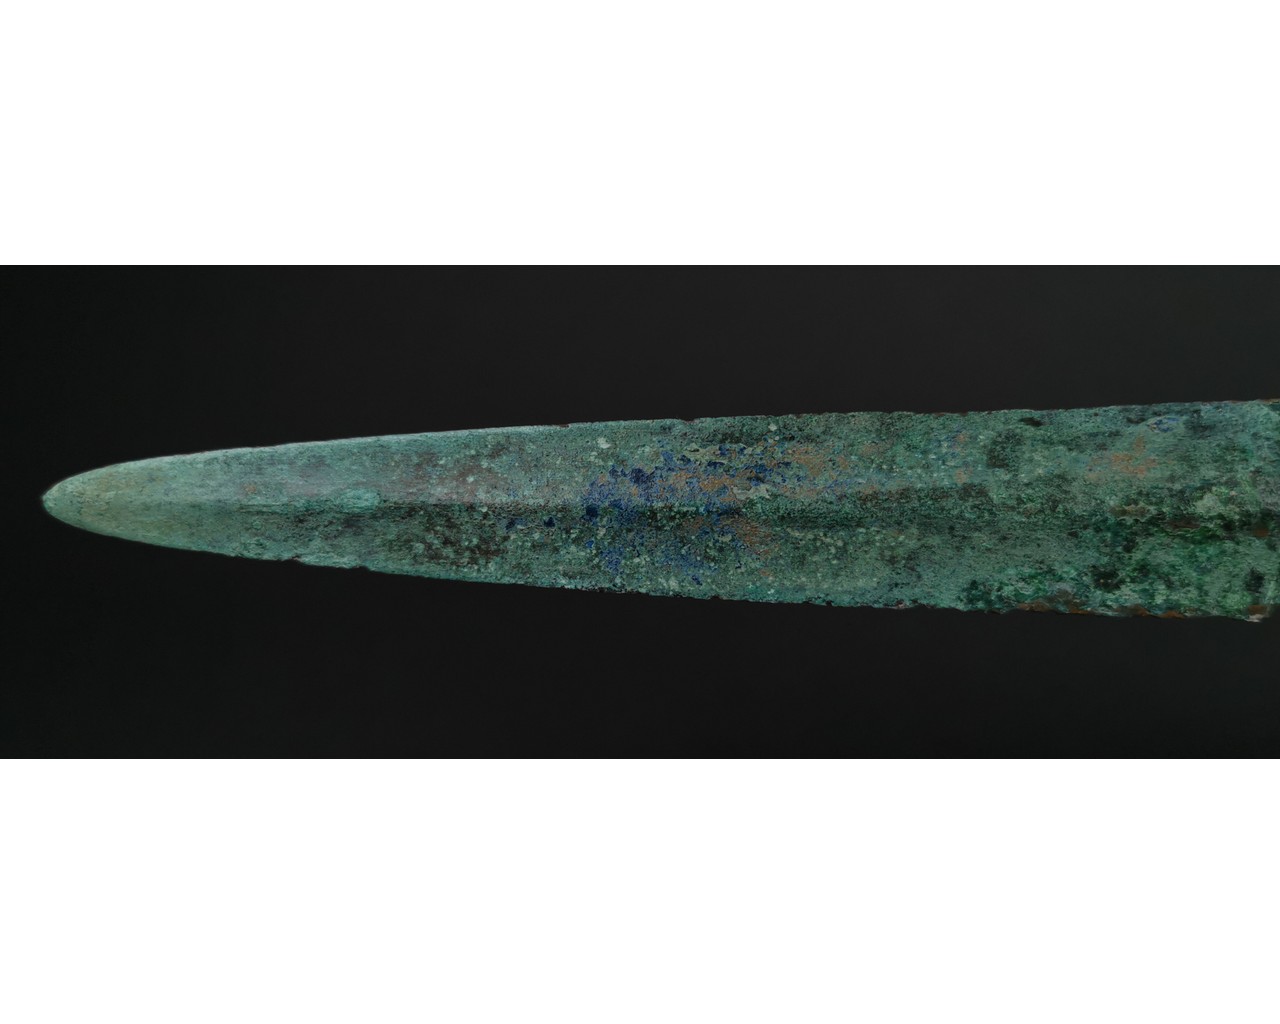 SUPERB ANCIENT BRONZE SWORD WITH HANDLE - Image 5 of 5